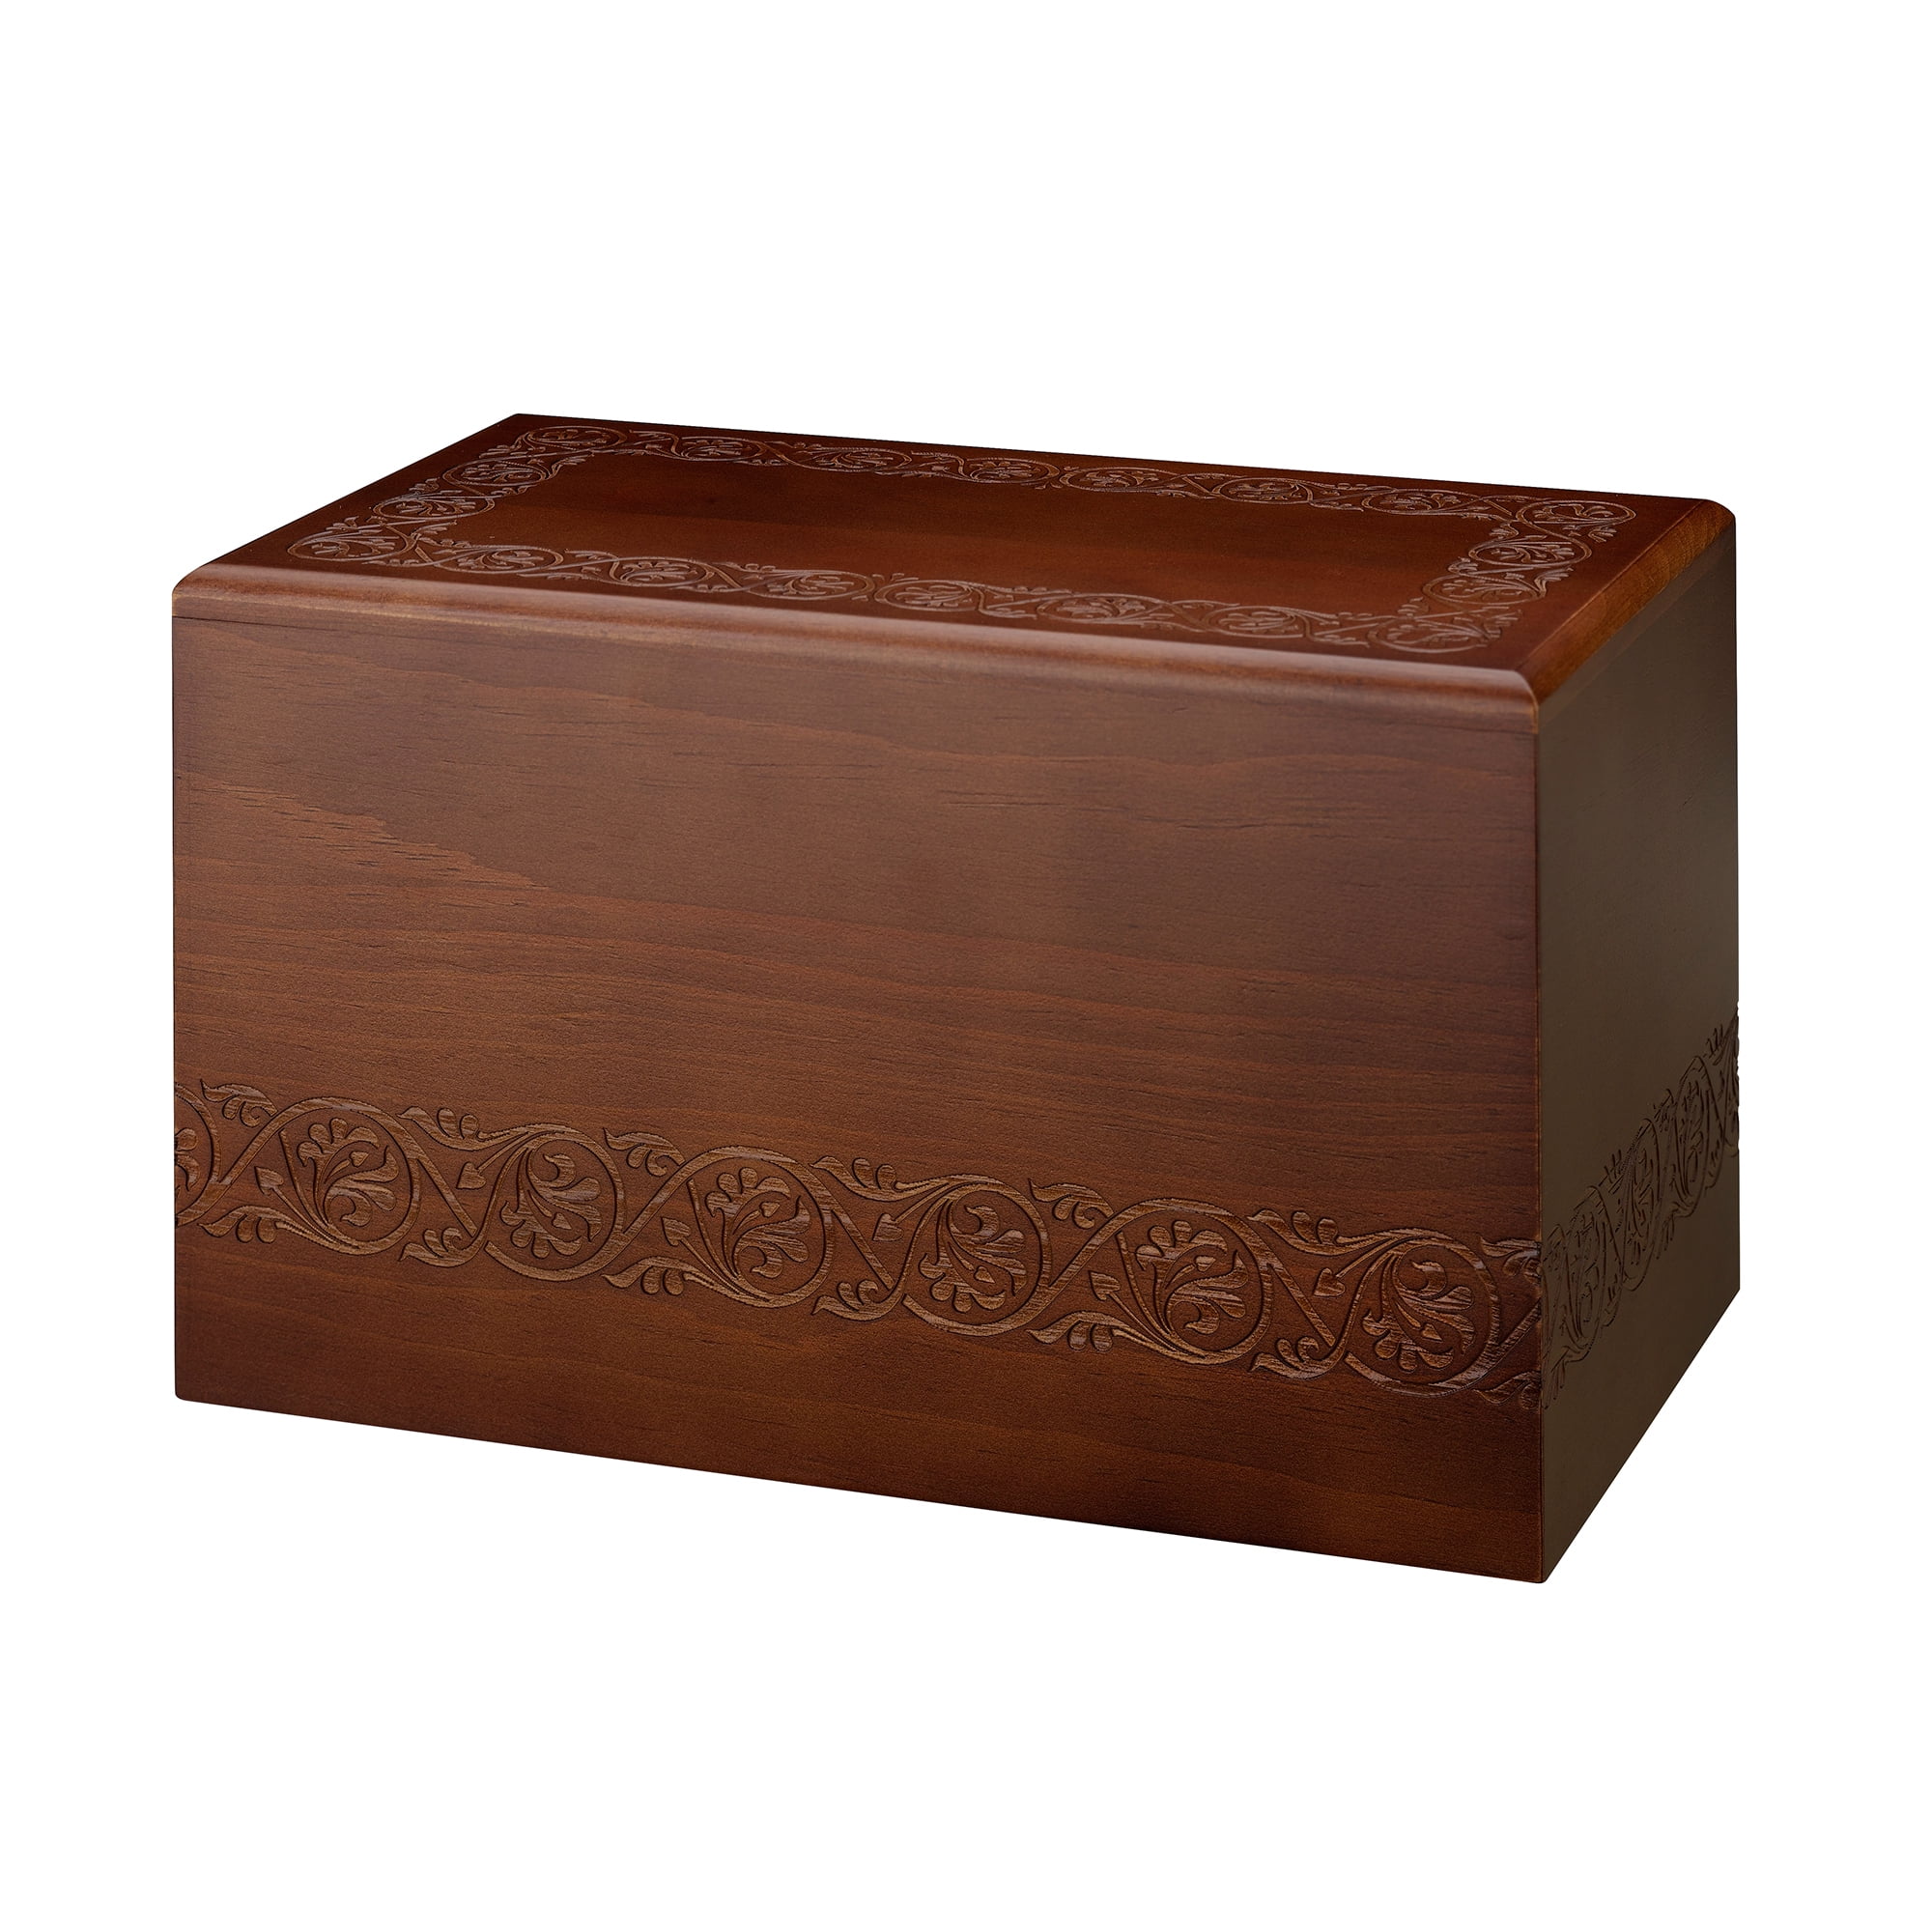 Contact me for sizes engravings colors Custom handmade cremation urn box Free shipping. Features custom engravings